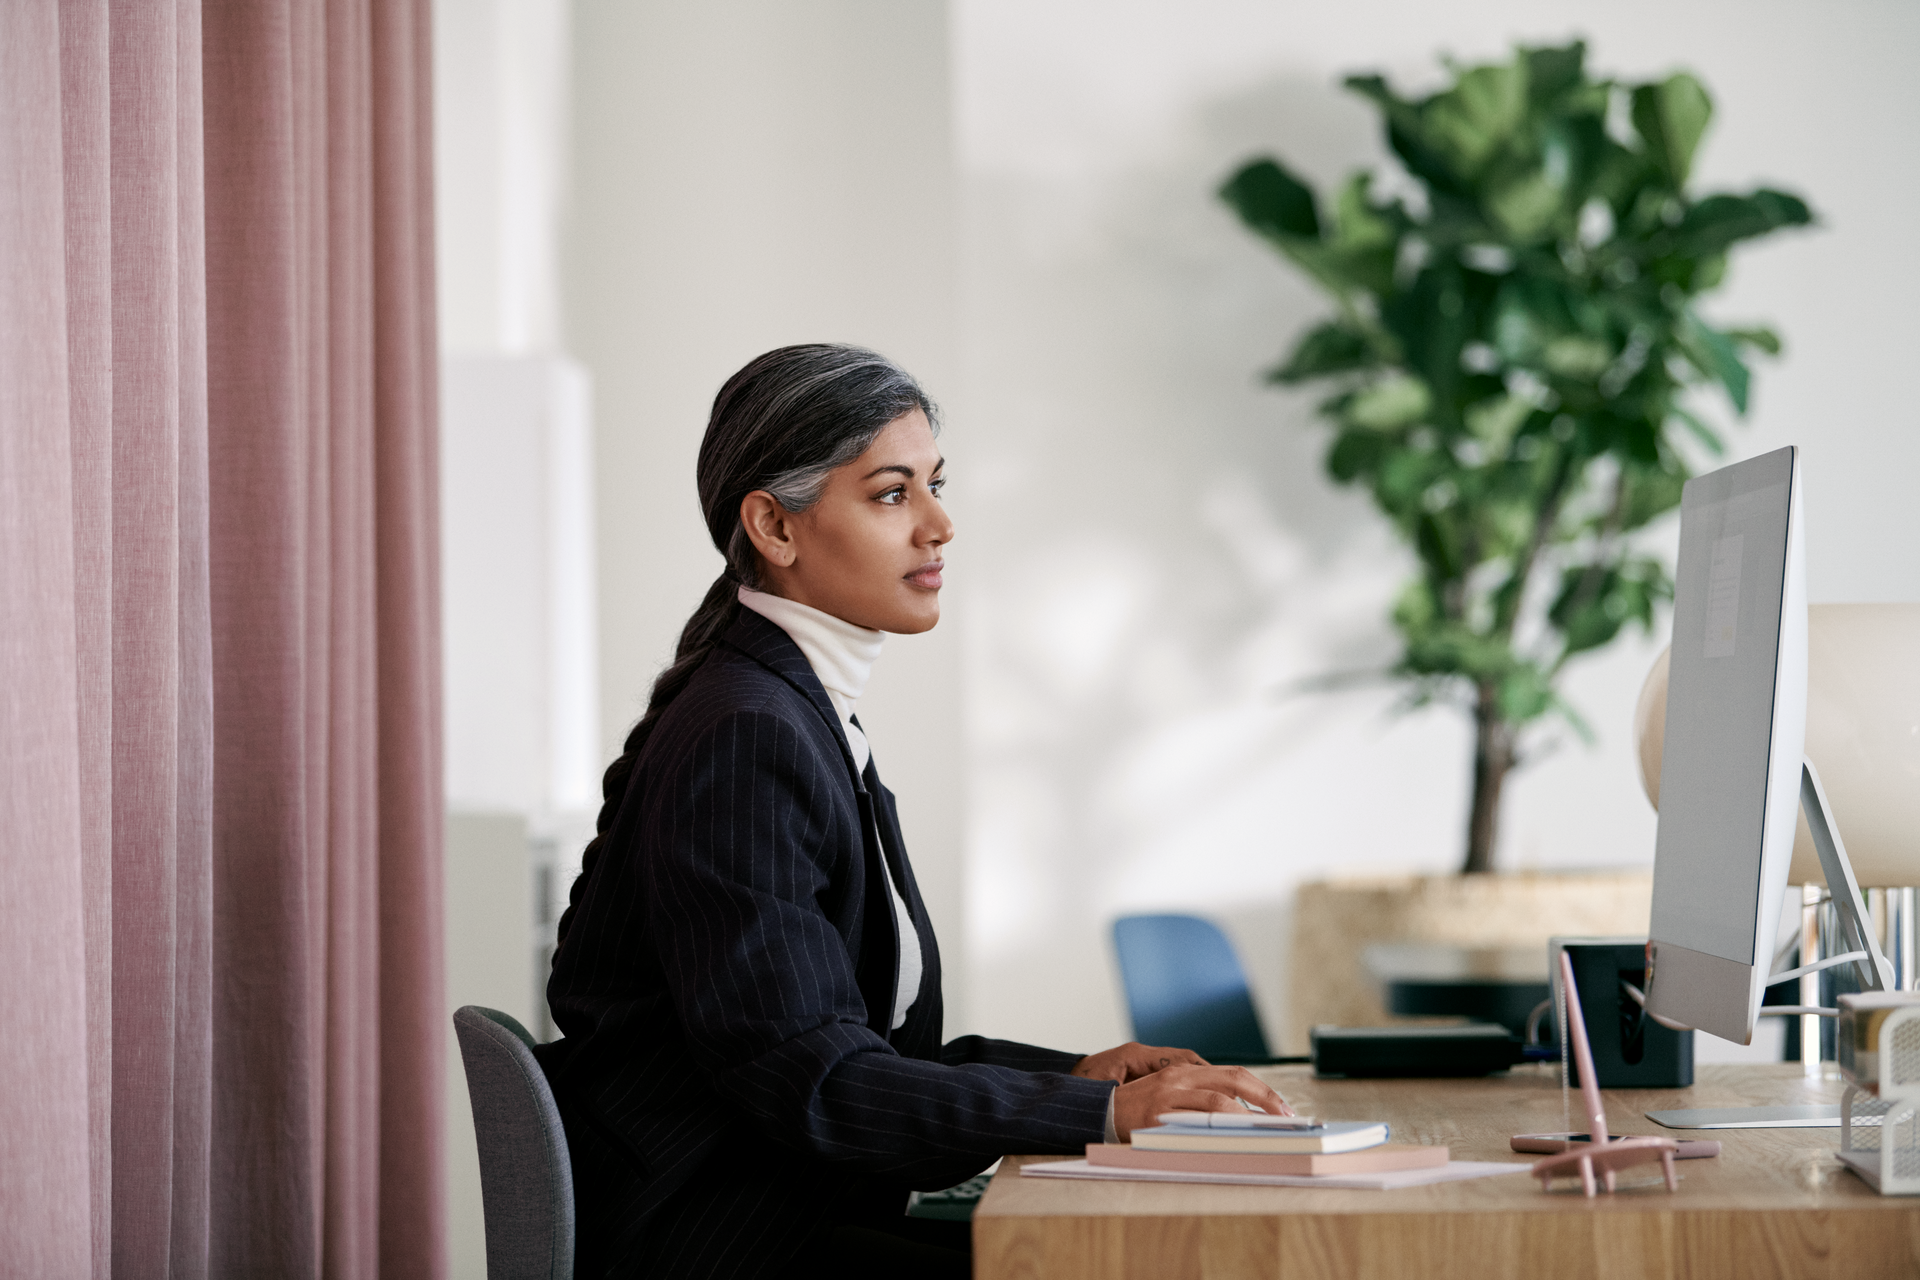 Woman working in office